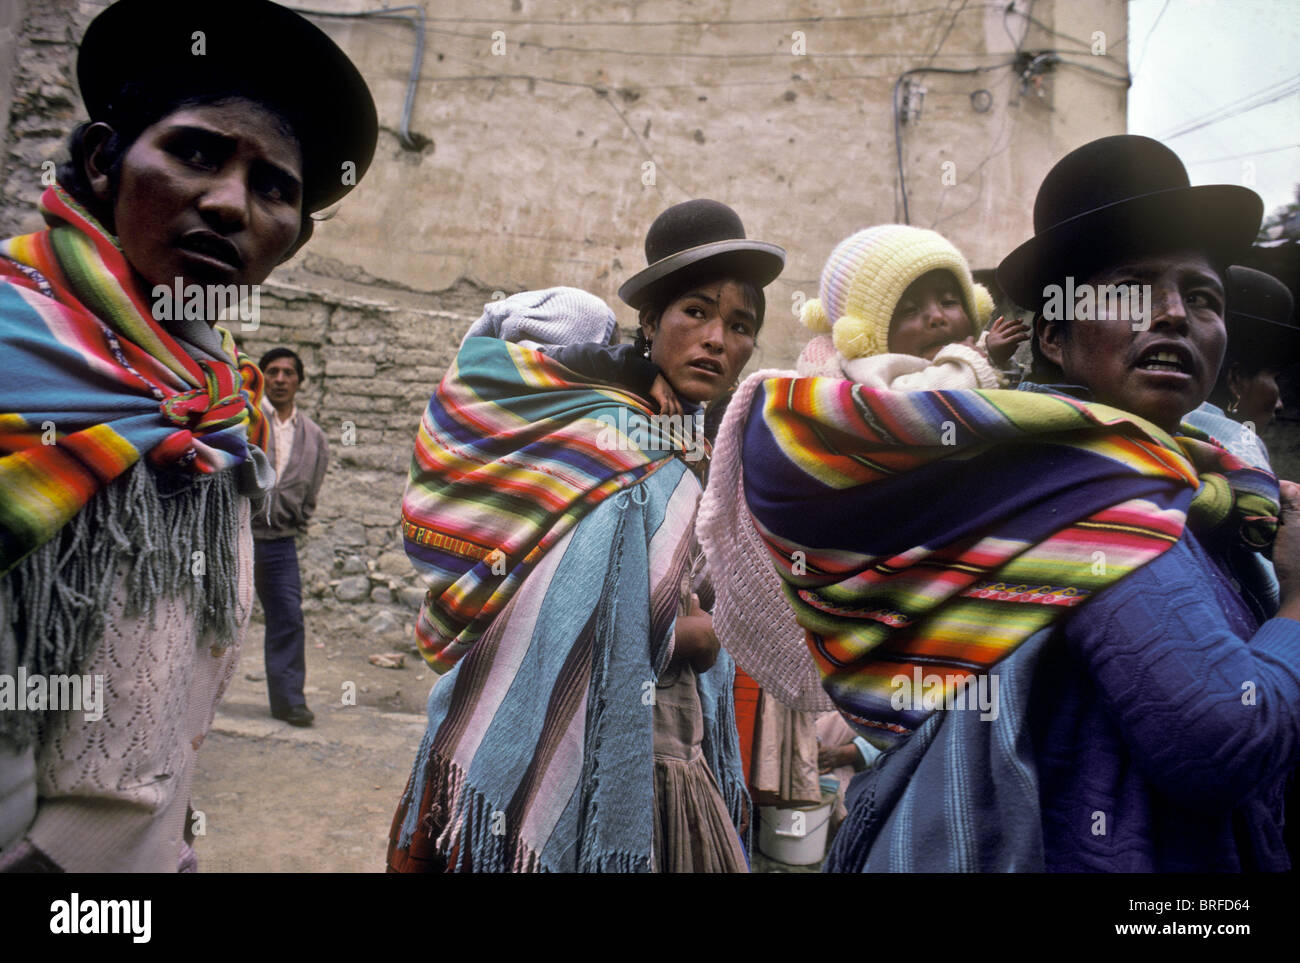 Aymara indian mothers carry their baby children on their backs, Llallagua mining town, Bolivia Stock Photo